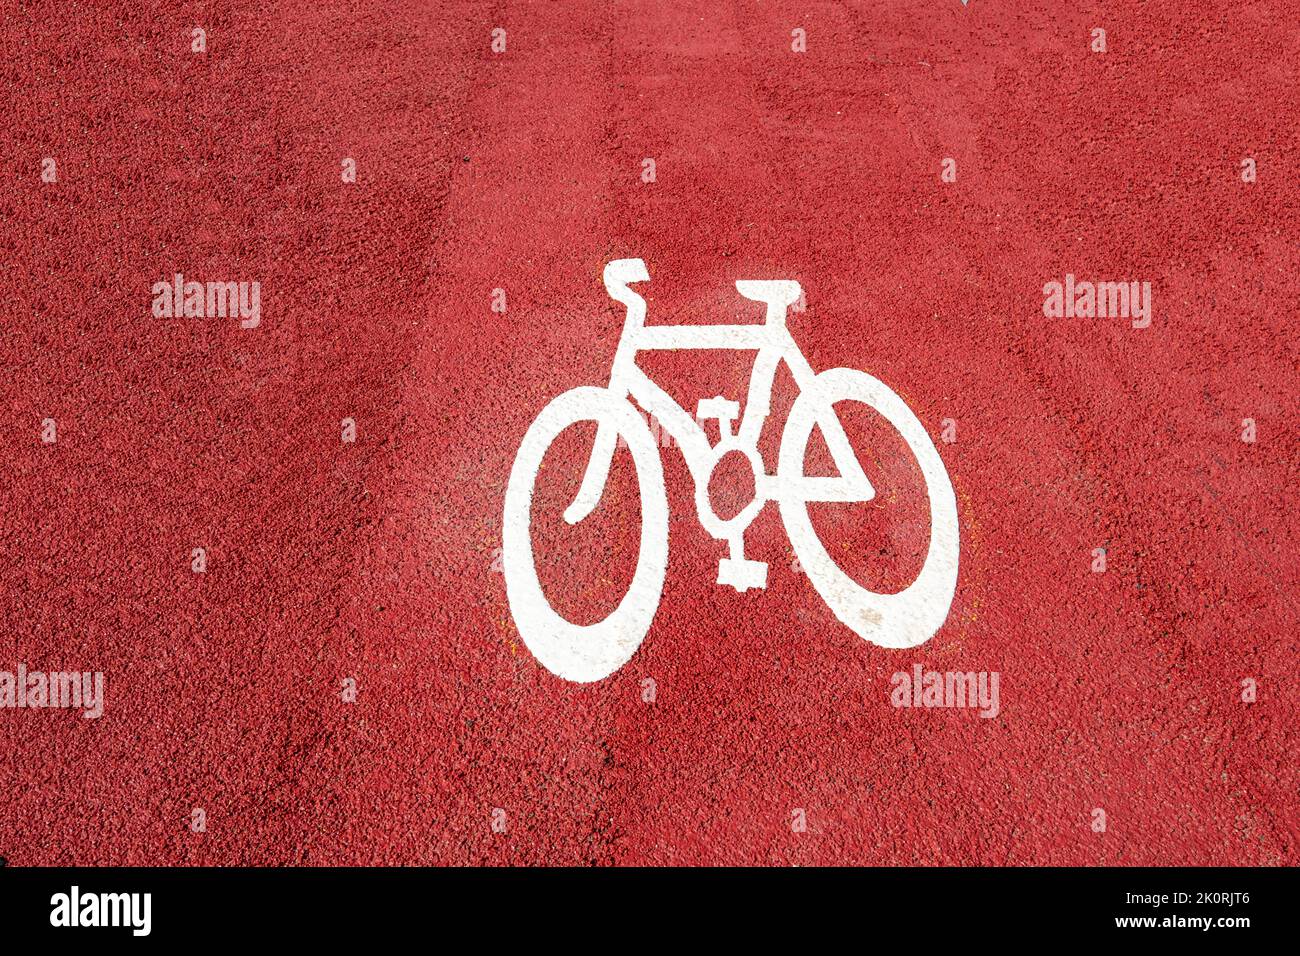 Bicycle symbol painted on red tarmac UK Stock Photo